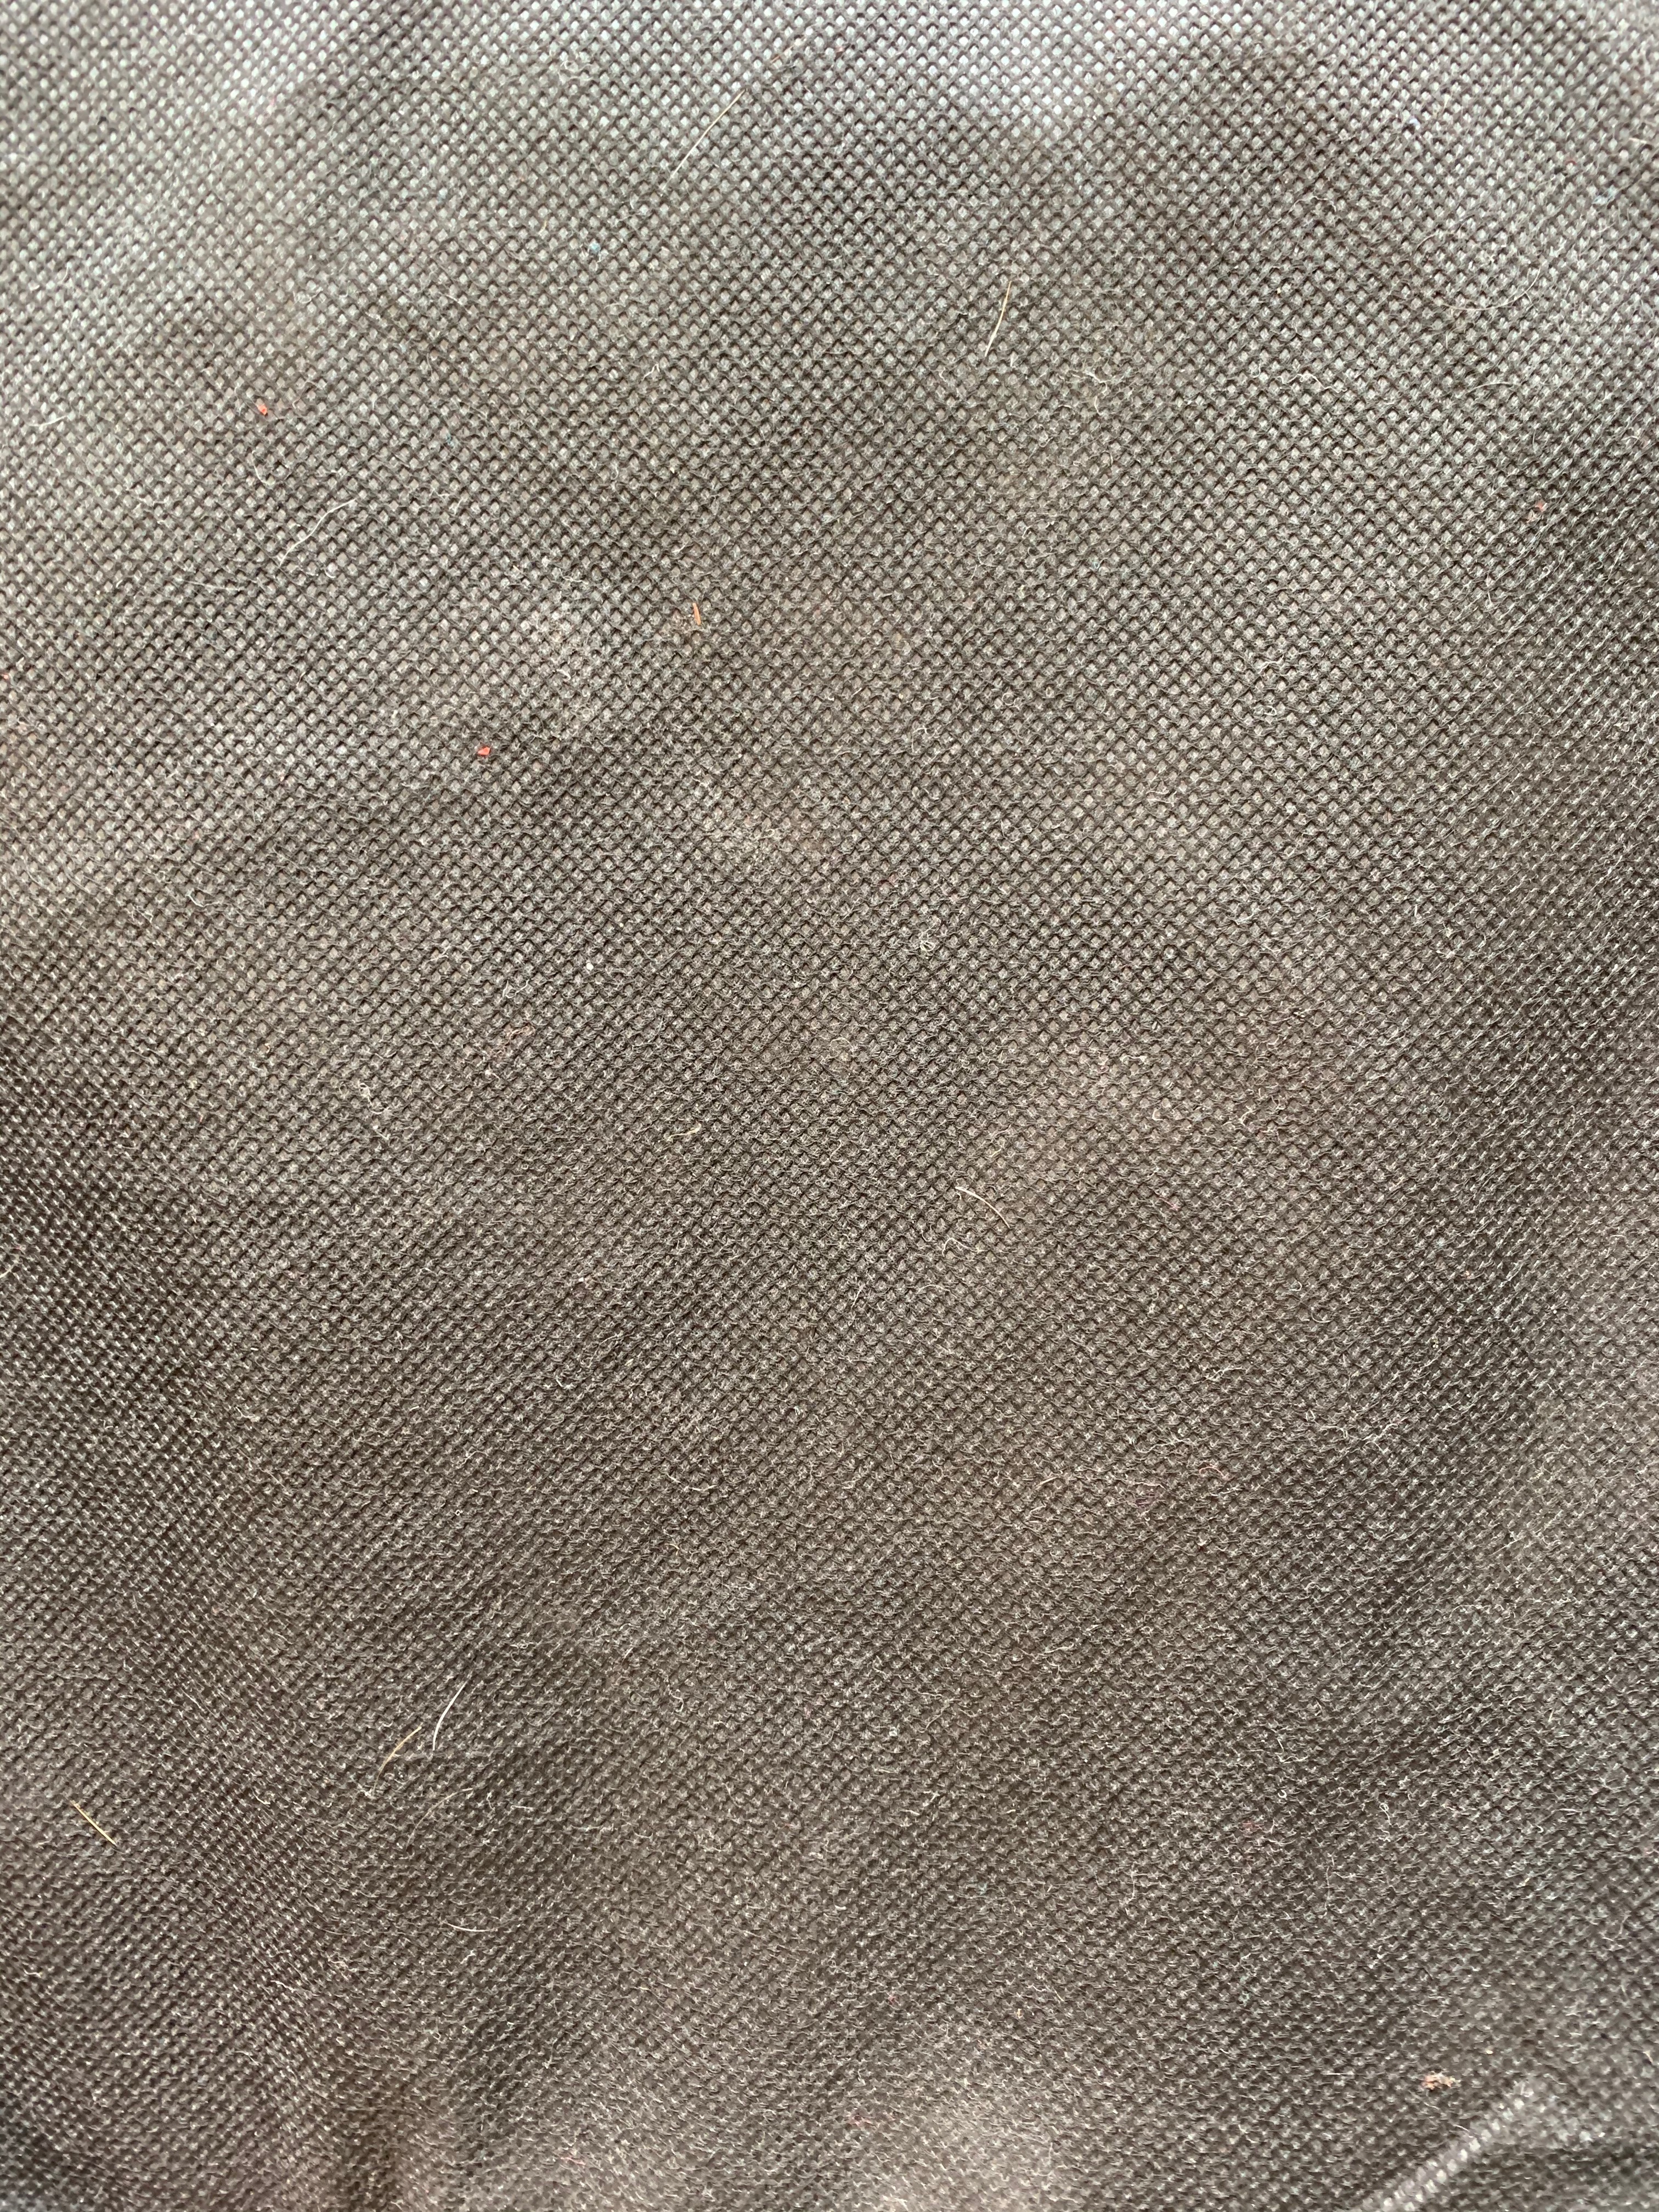 Corrugated paper texture with tons of detail | Free Textures